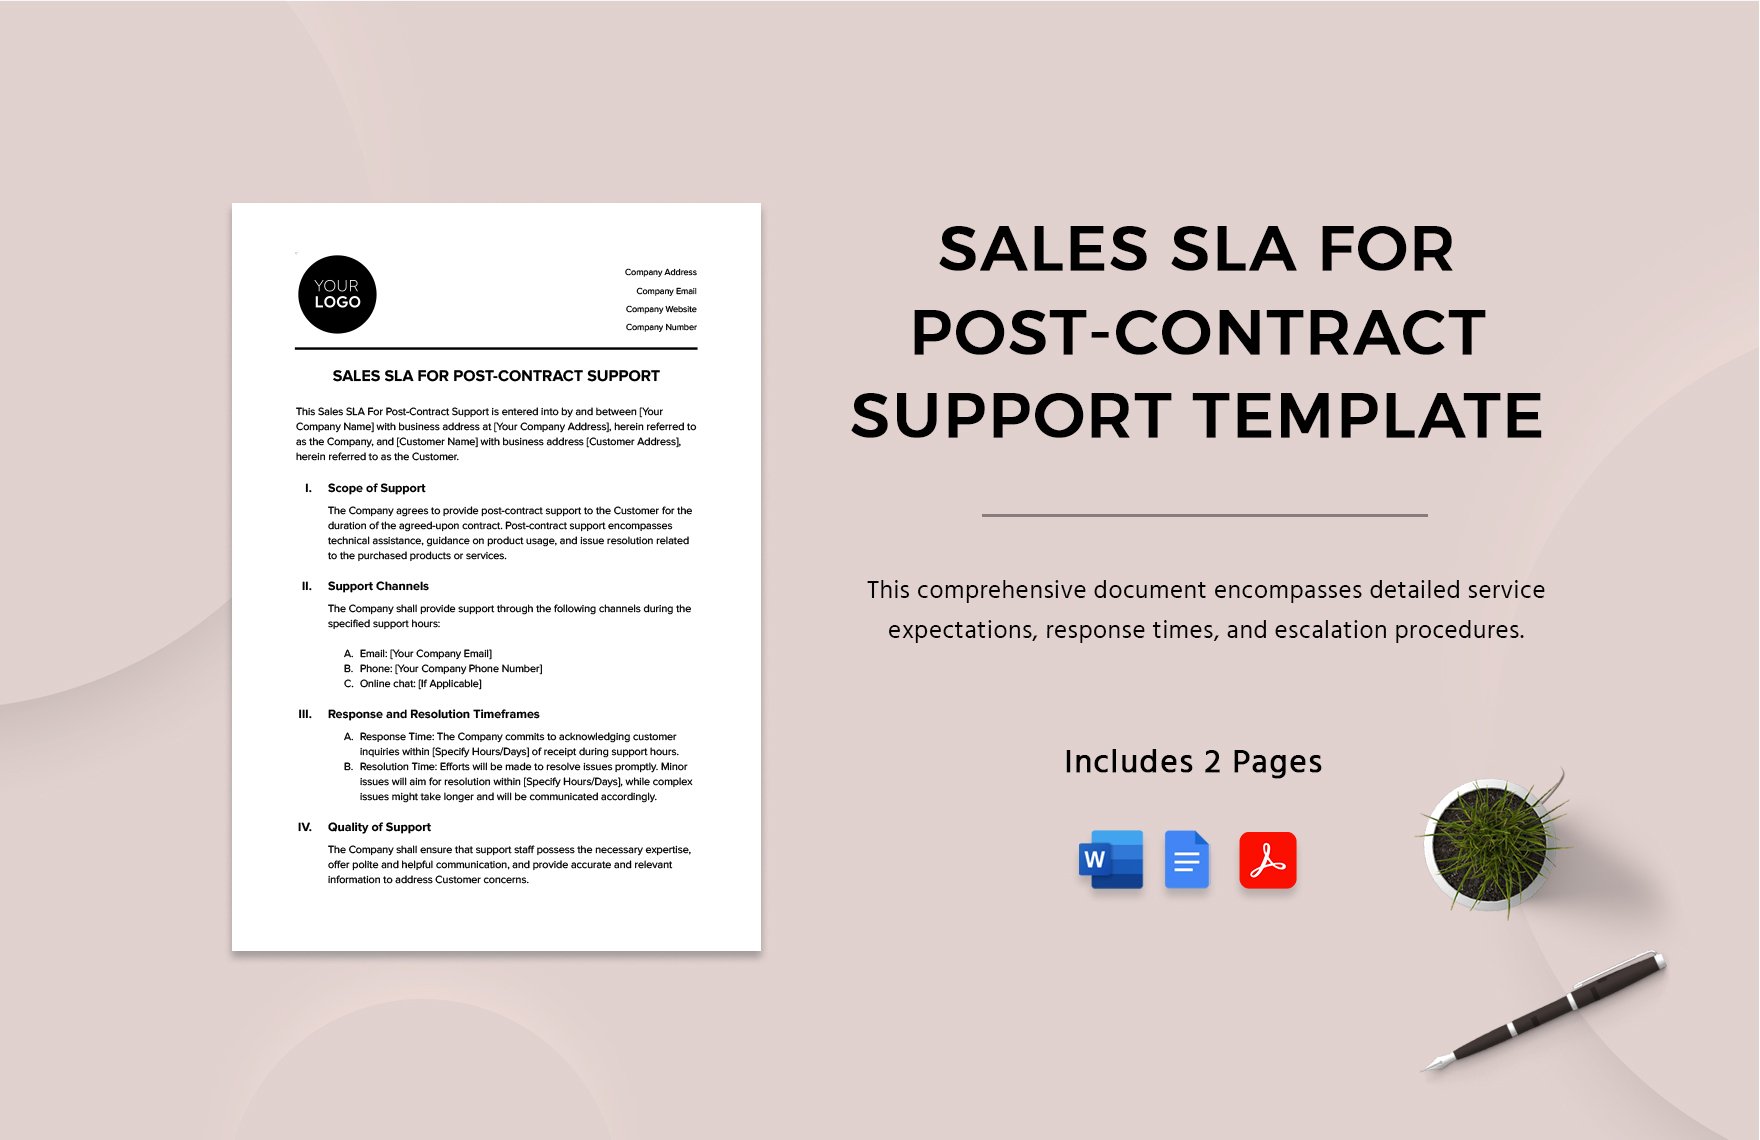 Sales SLA for Post-Contract Support Template in Word, Google Docs, PDF